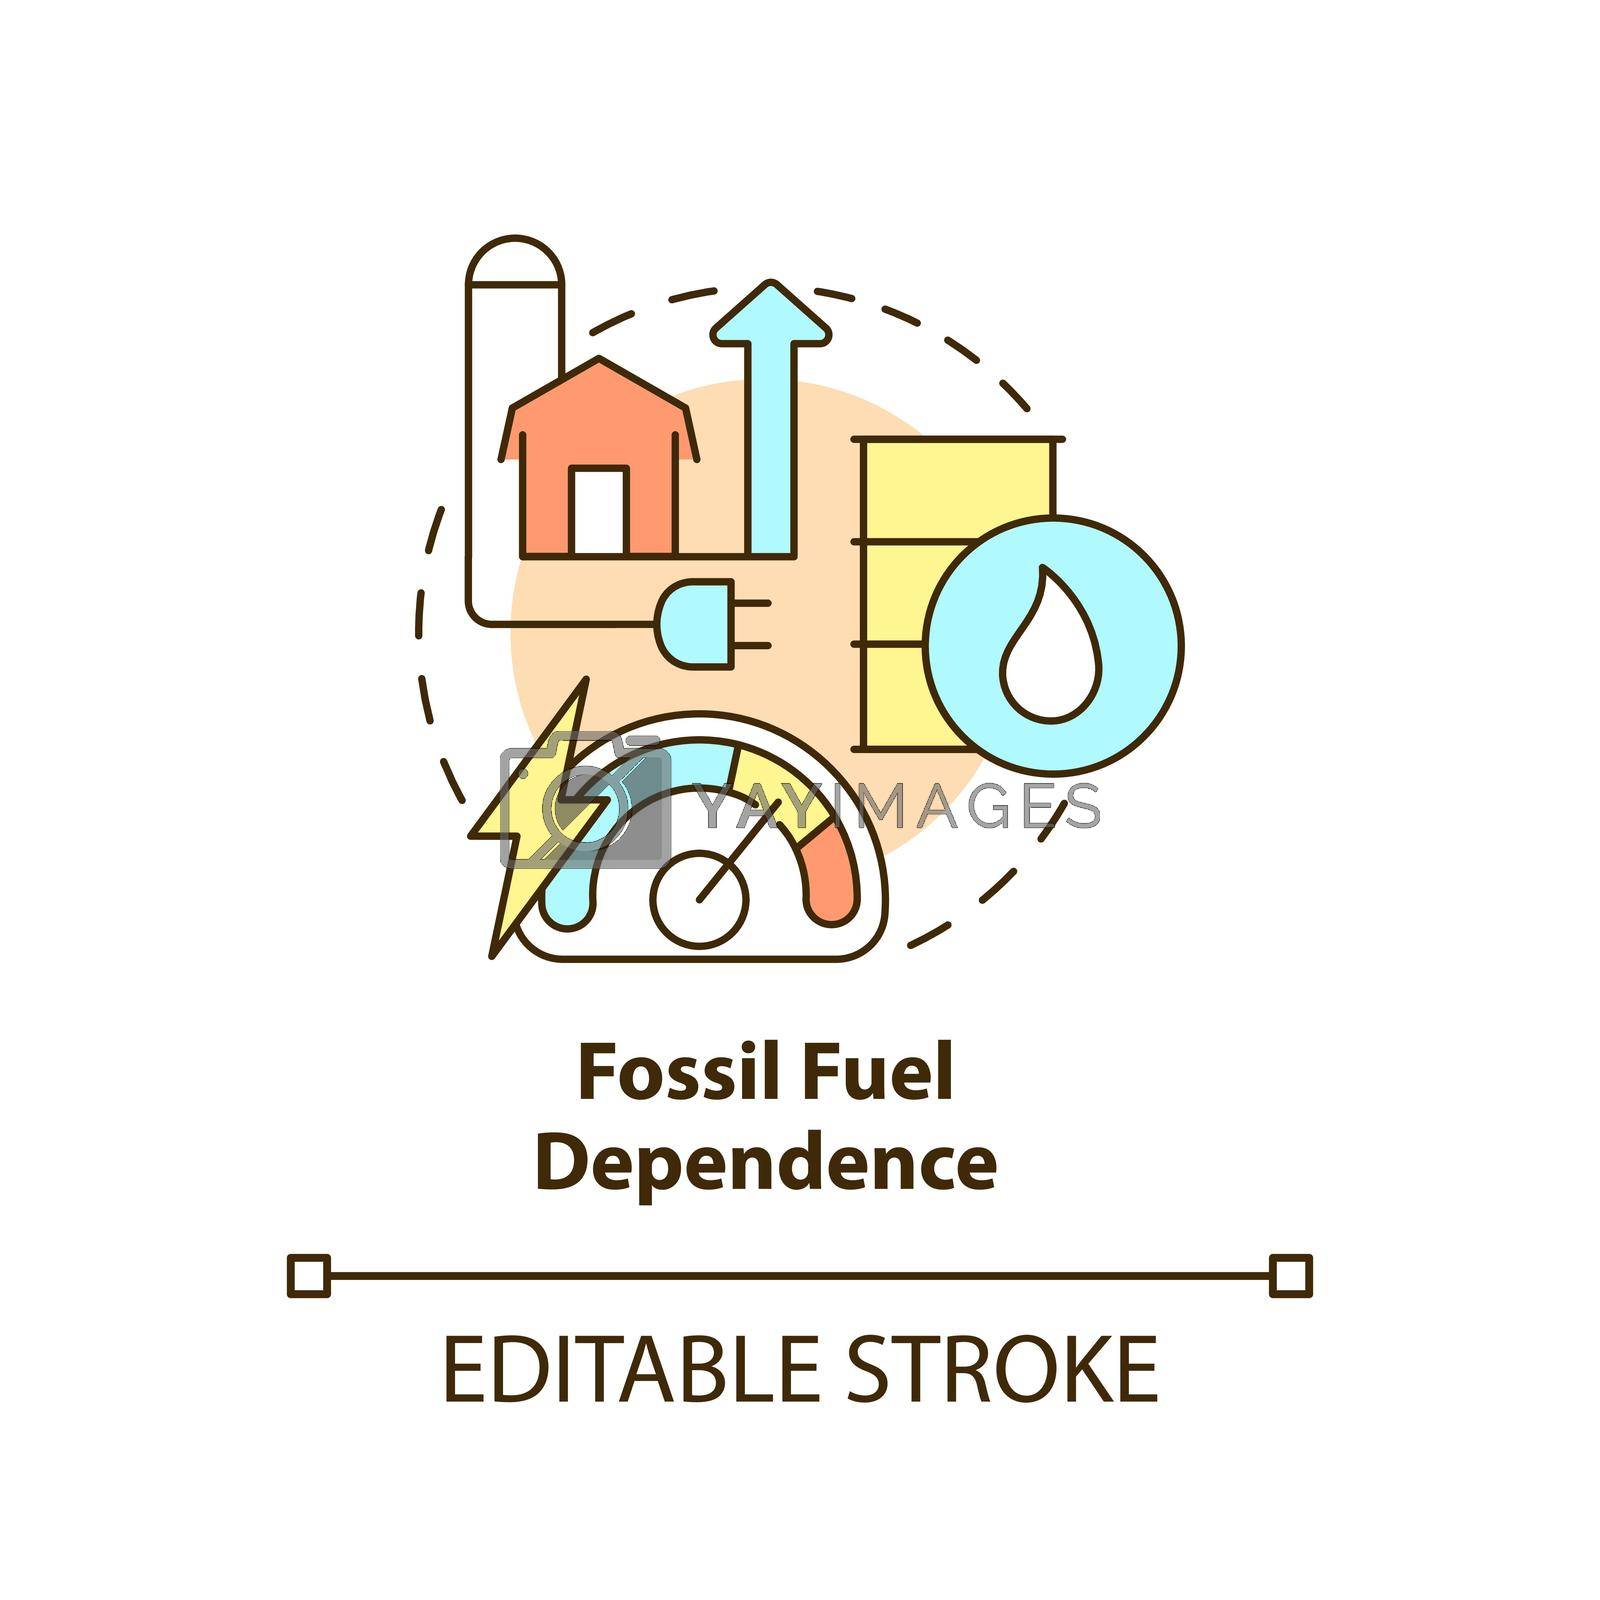 Royalty free image of Fossil fuel dependence concept icon by bsd